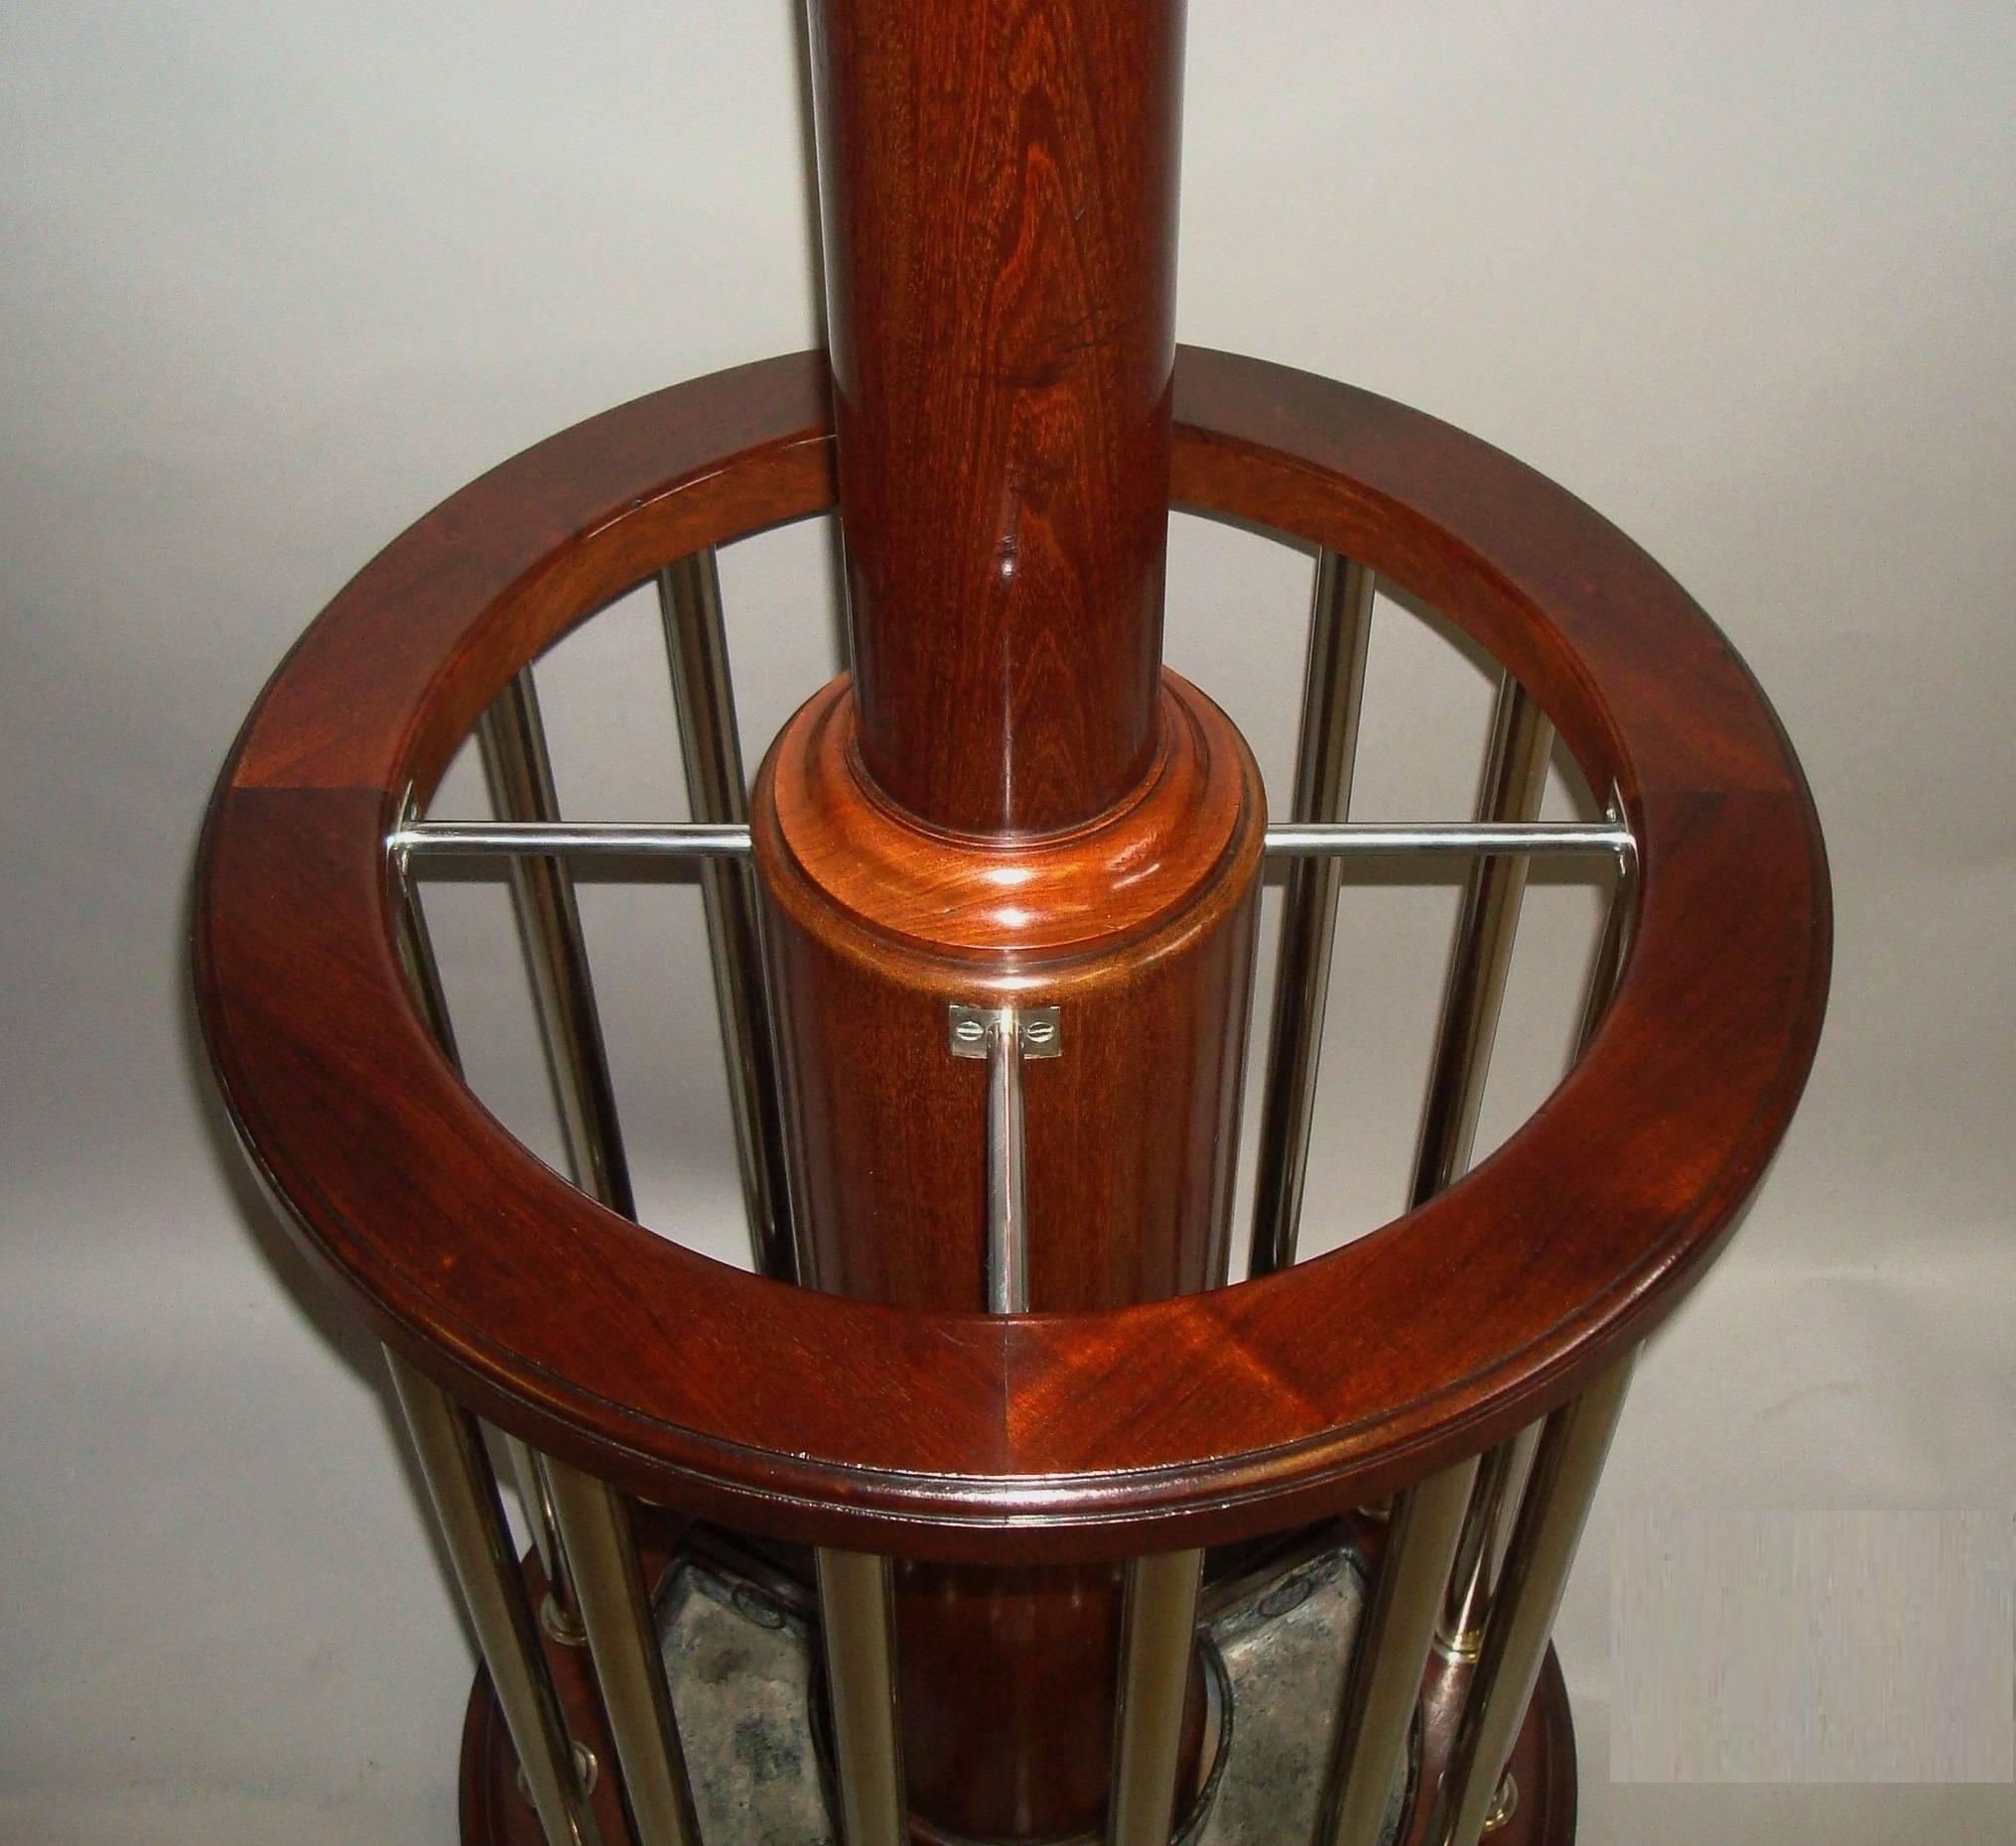 Polished Early 20th Century Mahogany and Chrome Circular Hall Stand For Sale